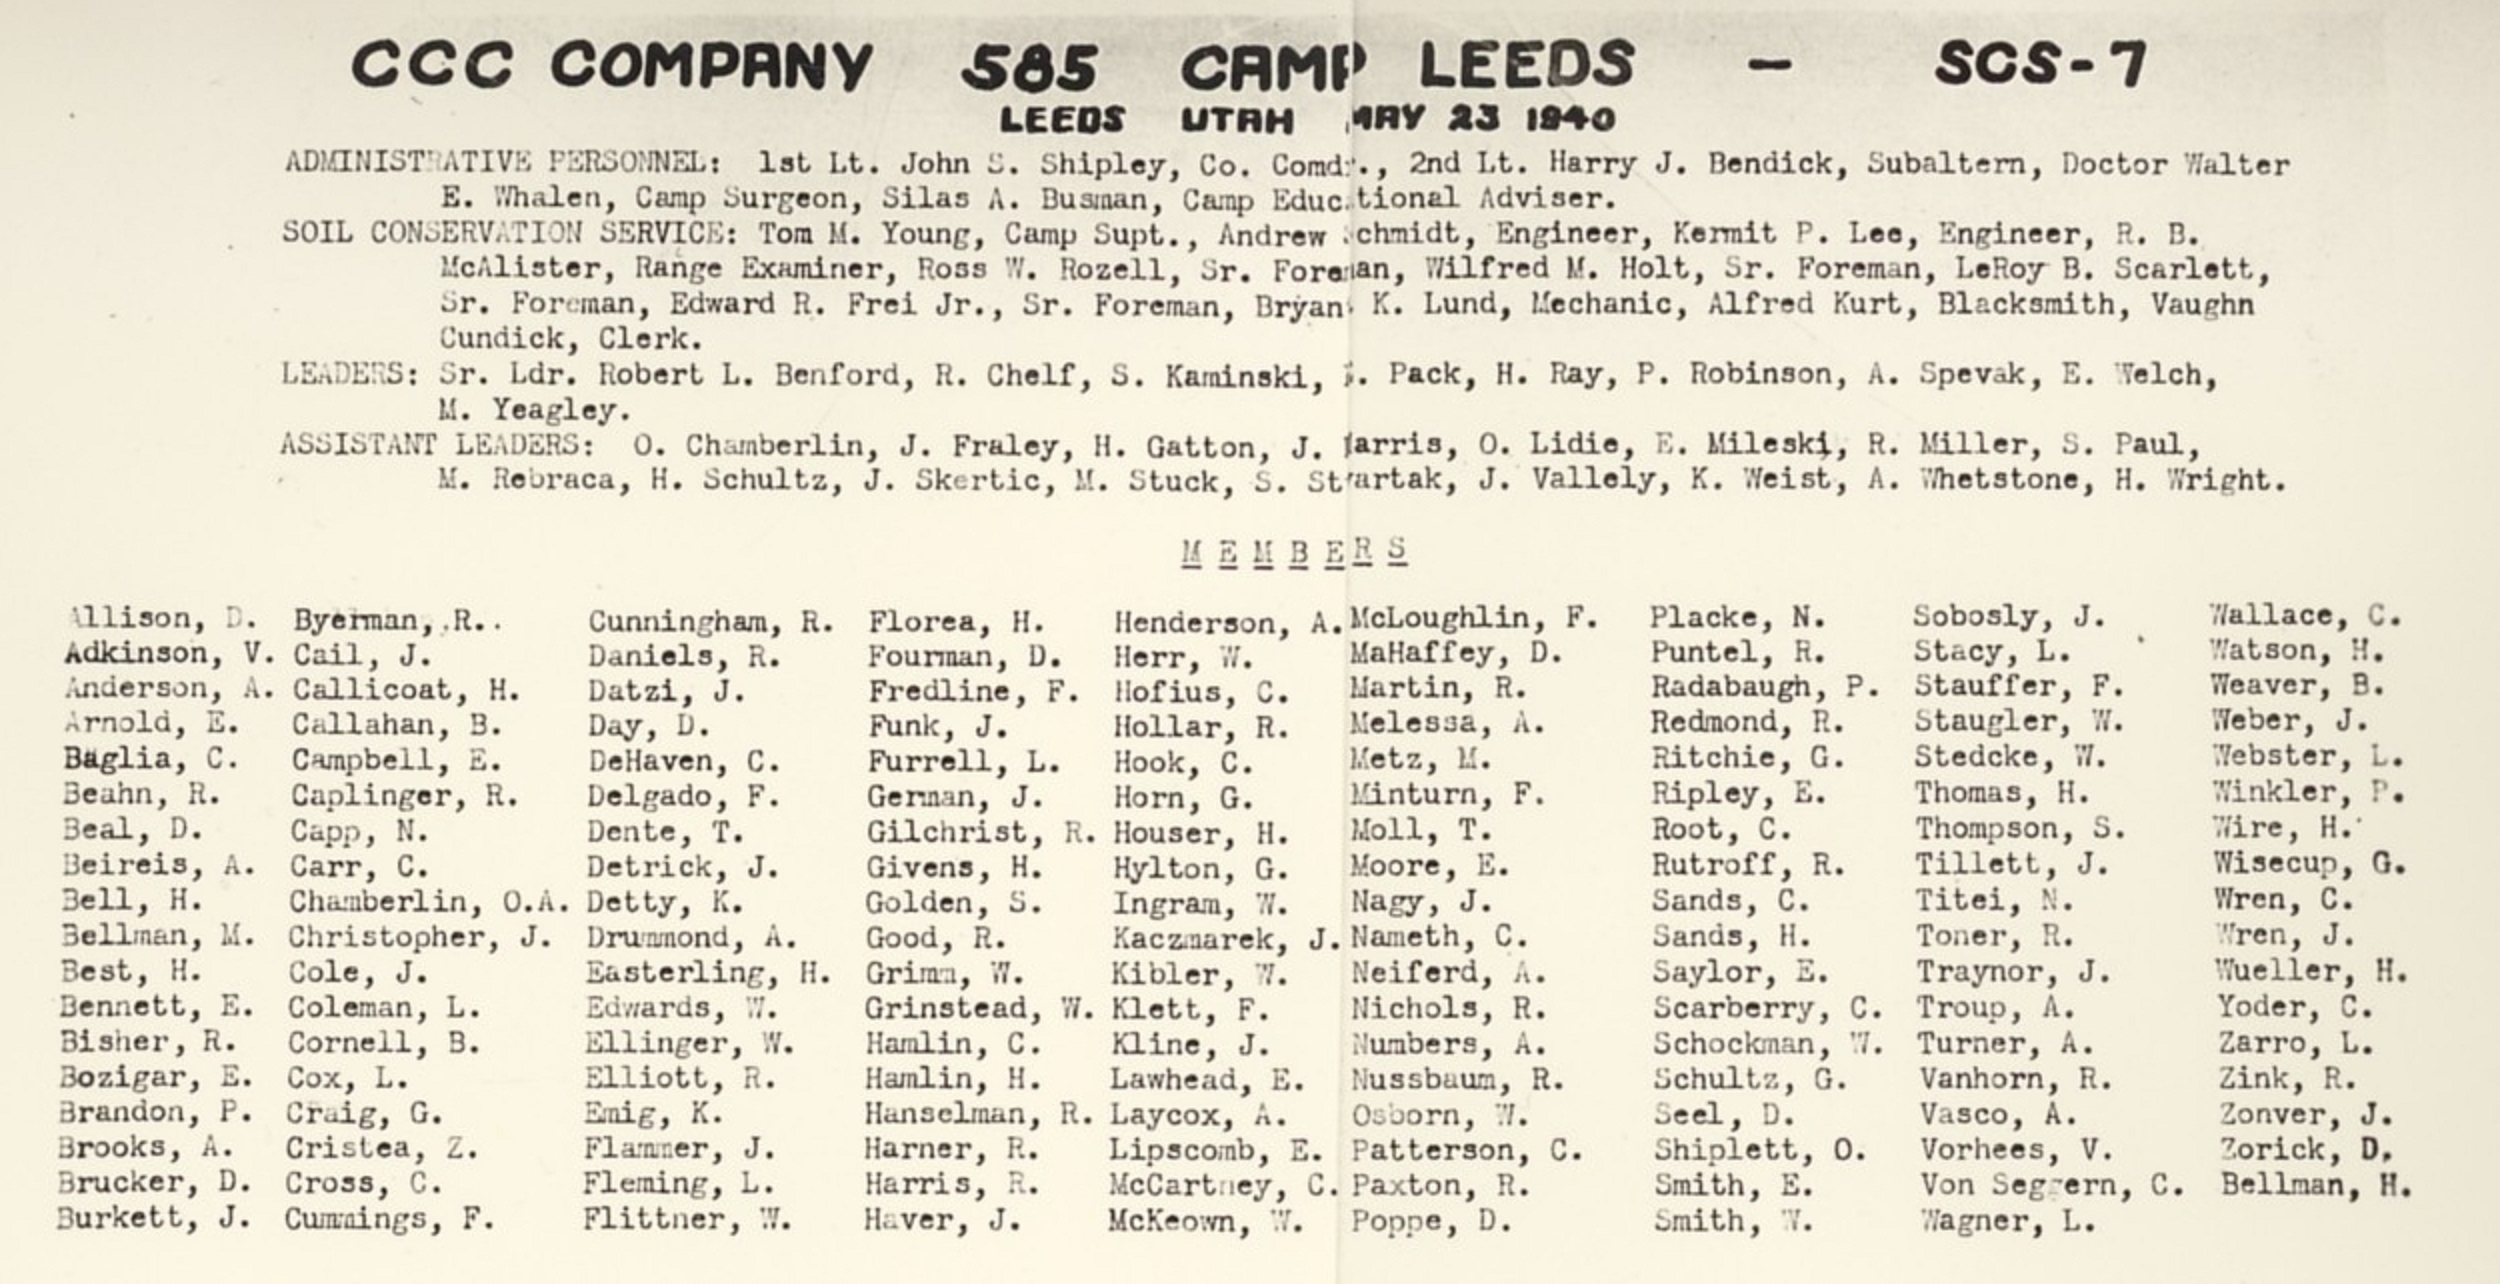 WCHS-00179 List of people at the Leeds CCC Camp